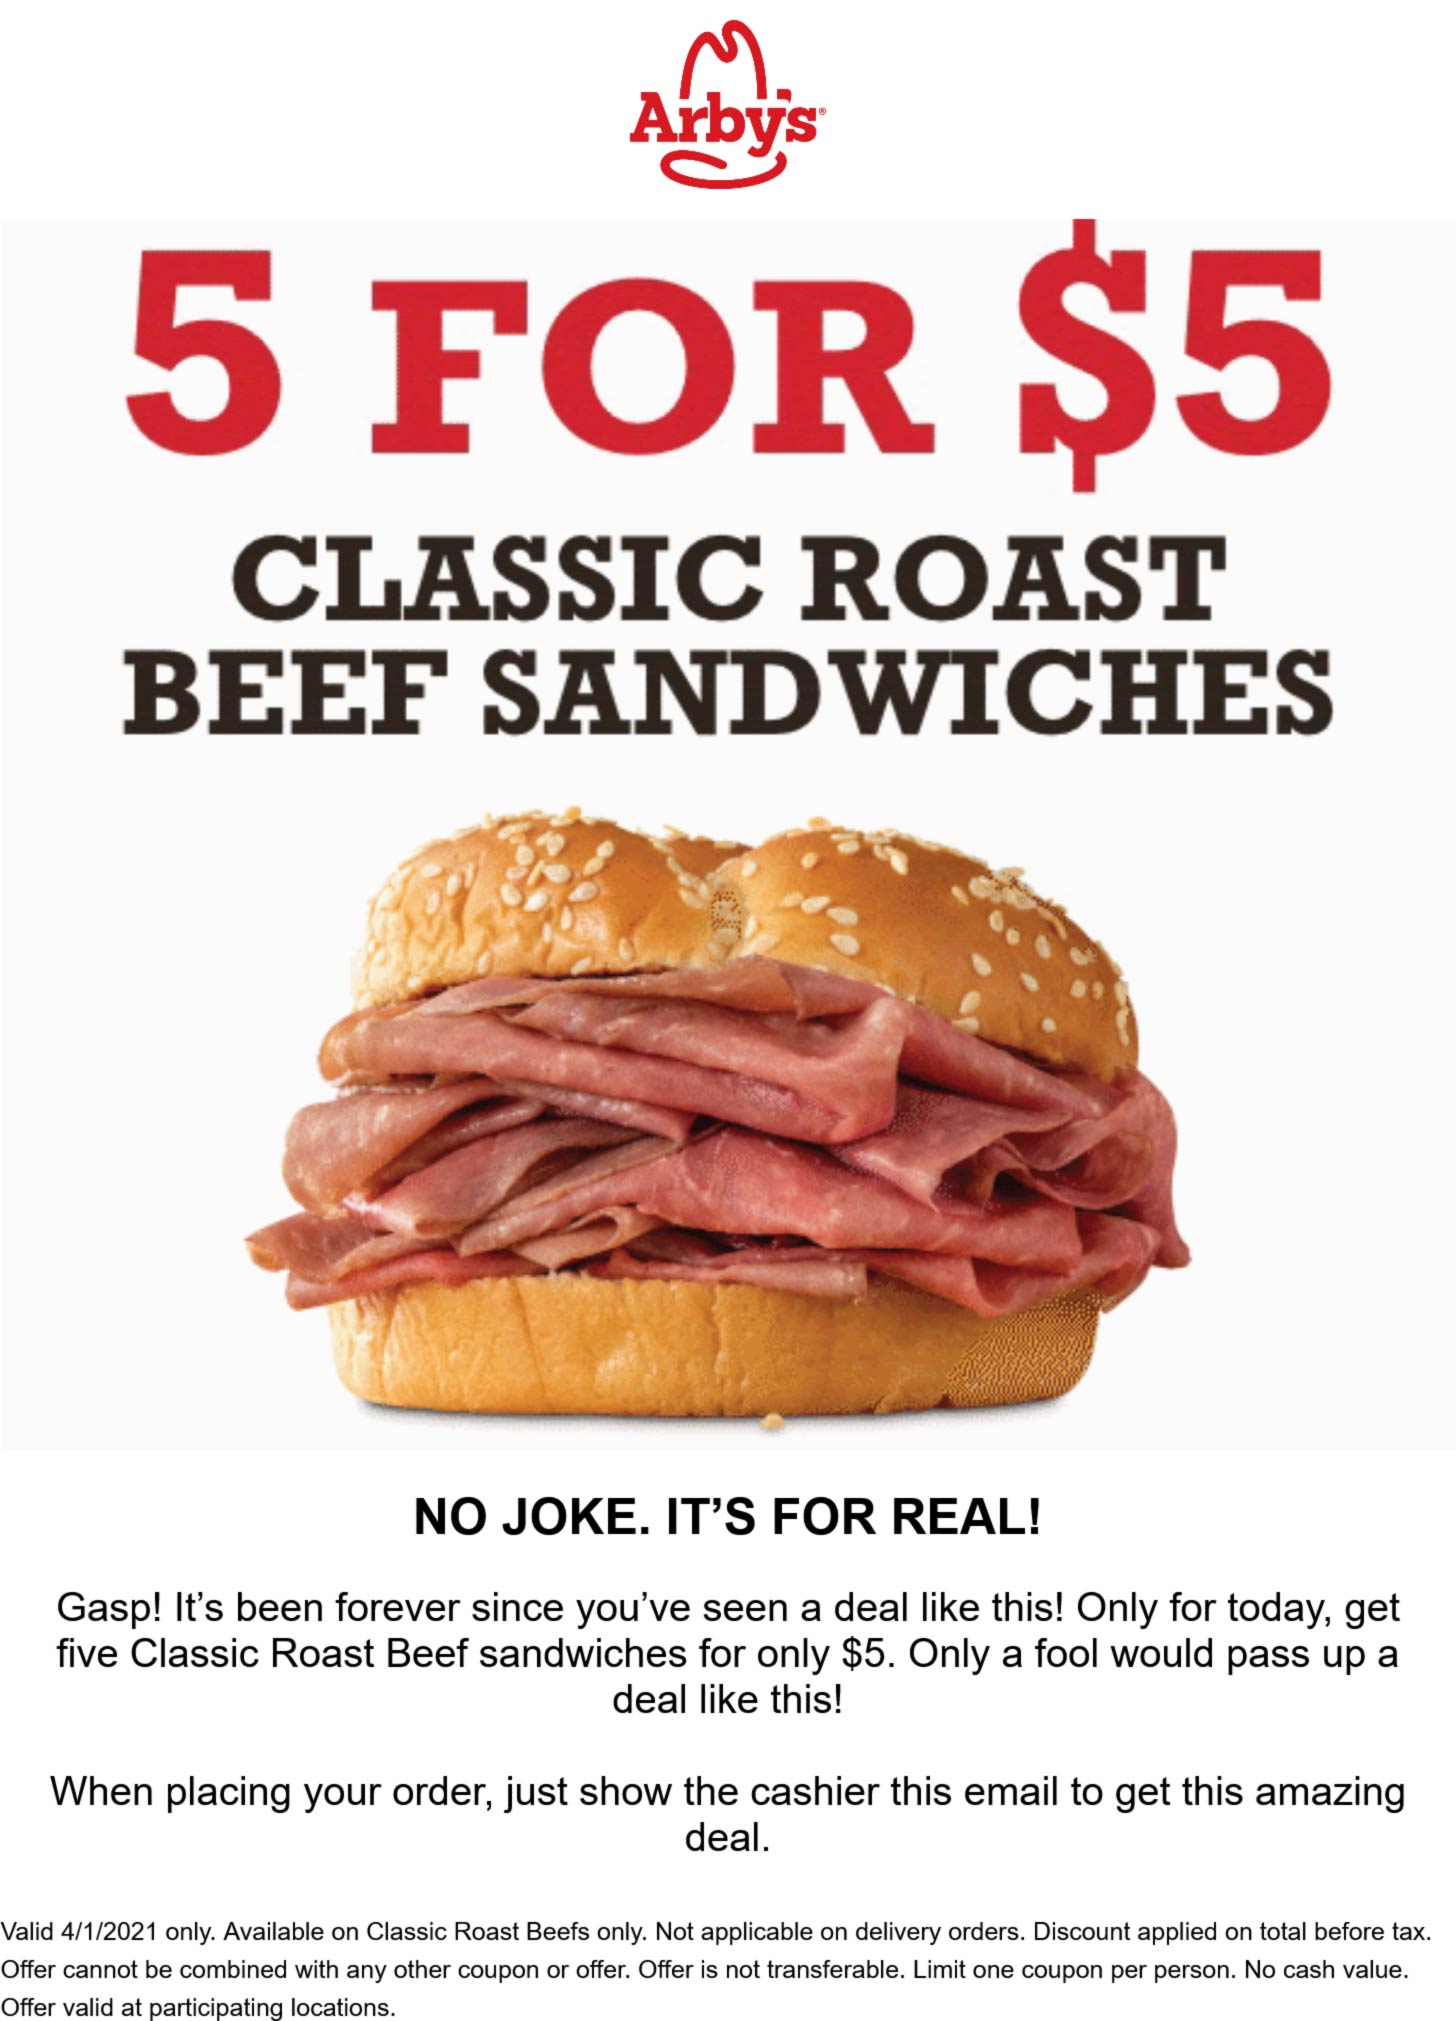 Arbys stores Coupon  5 roast beef sandwiches for $5 today at Arbys #arbys 